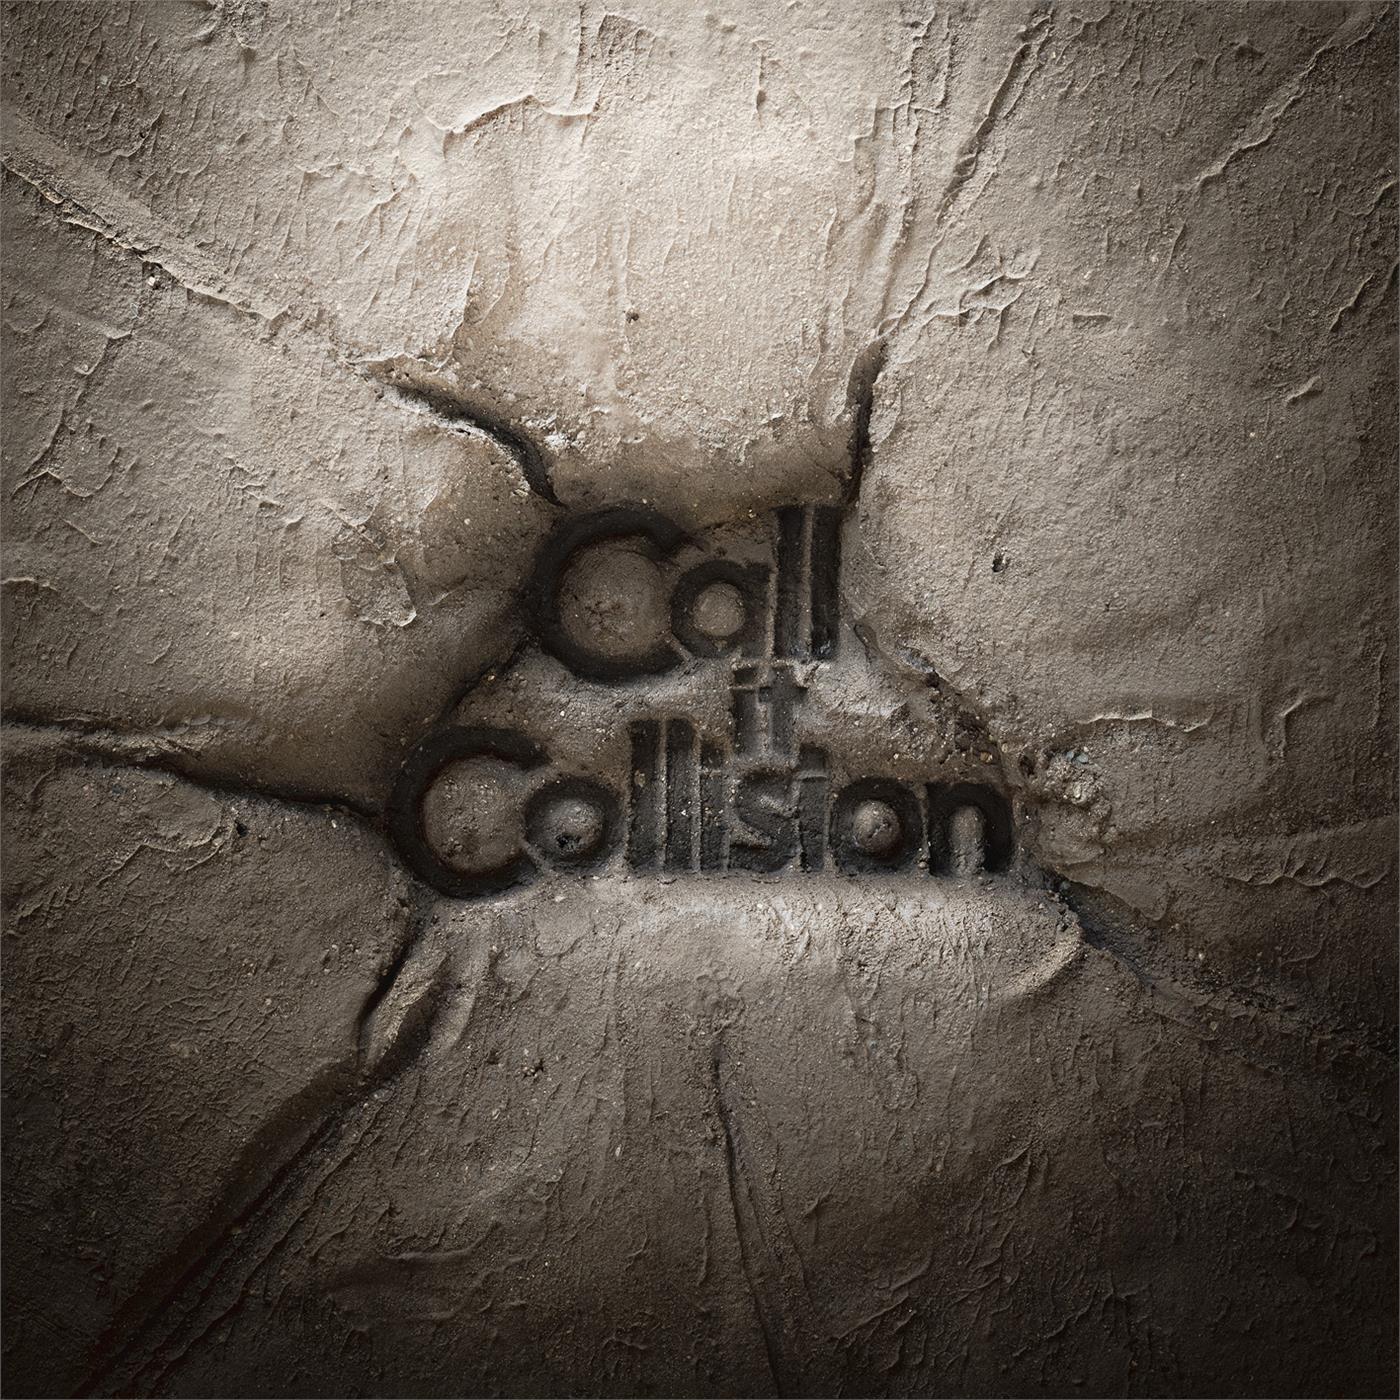 Call it Collision